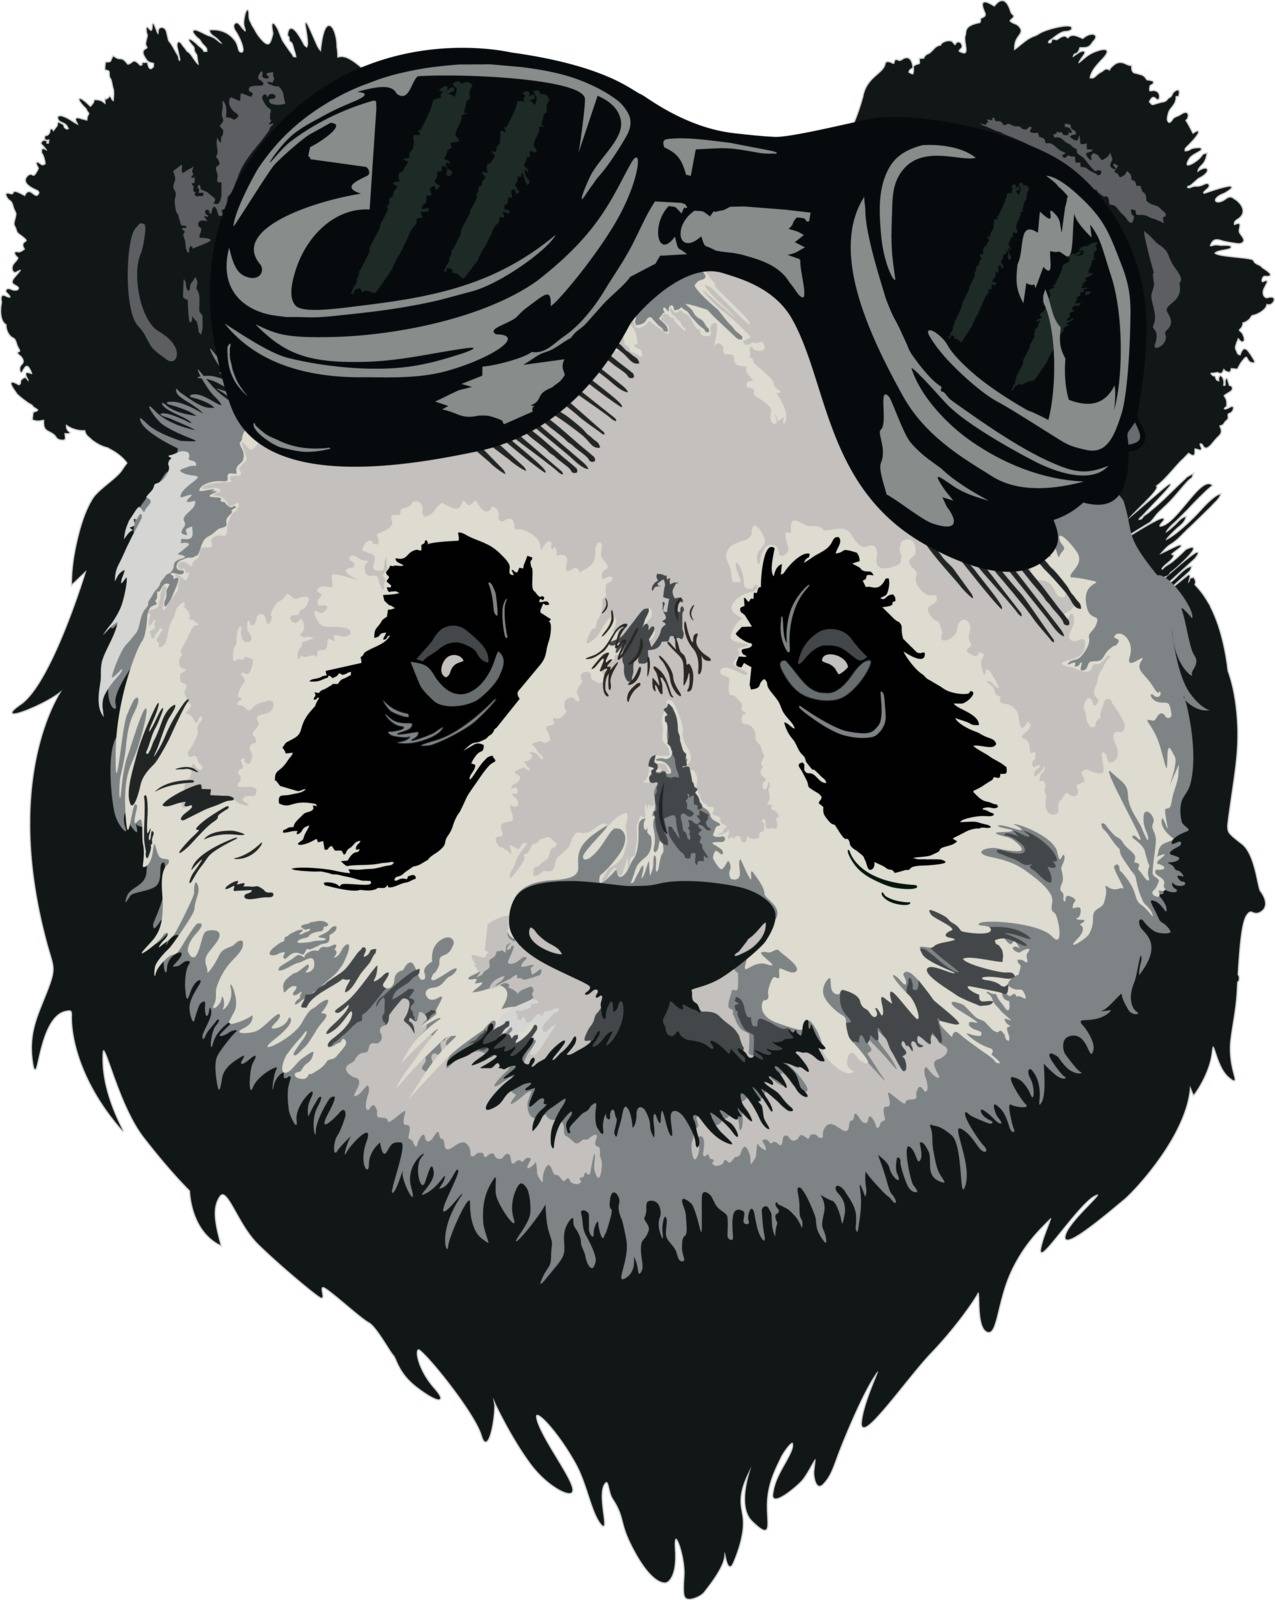 Black and white vector sketch of a Giant Panda's face.